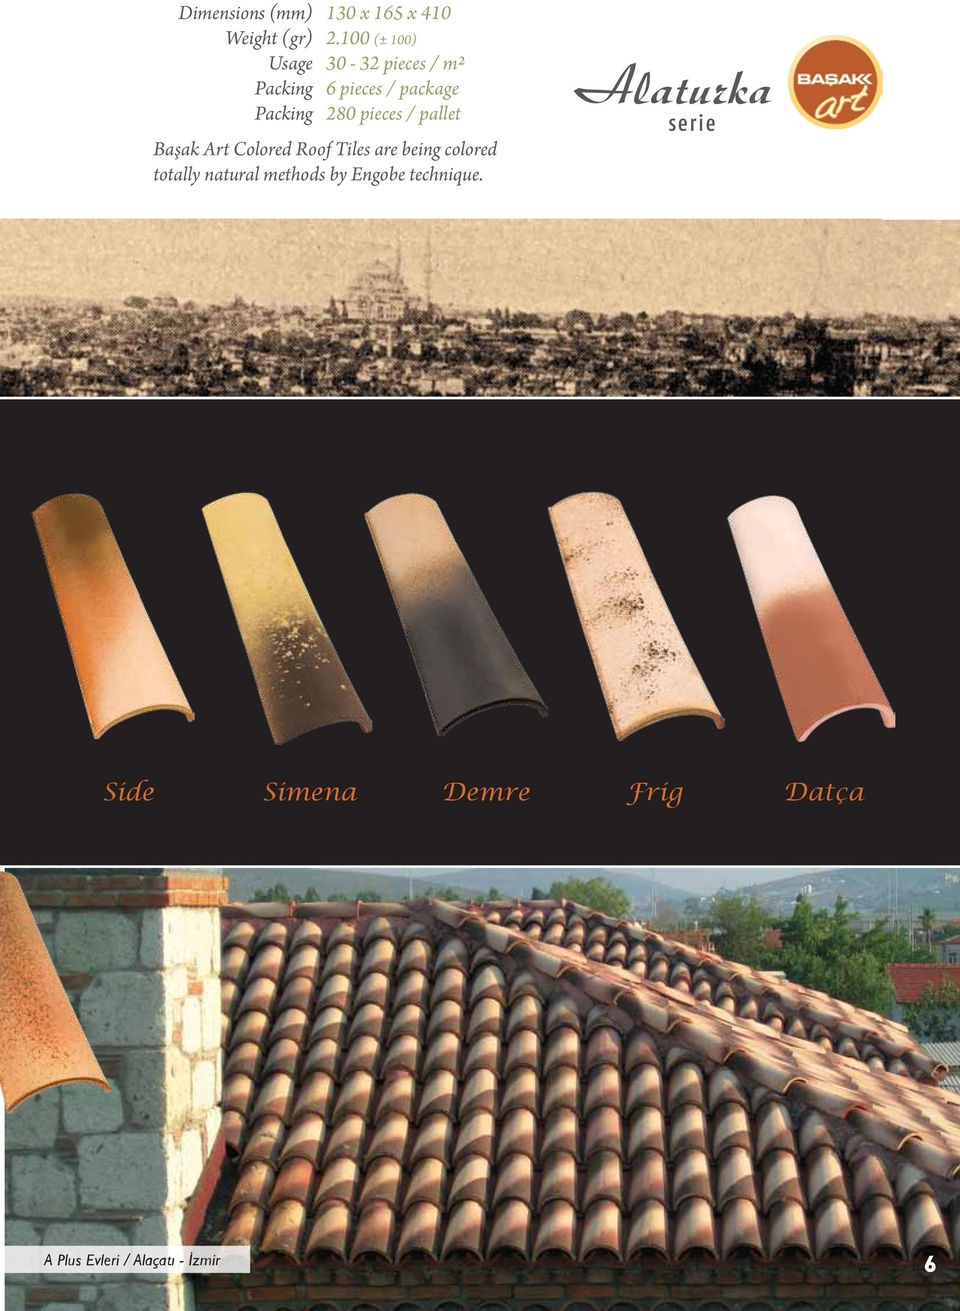 Başak Art Colored Roof Tiles are being colored totally natural methods